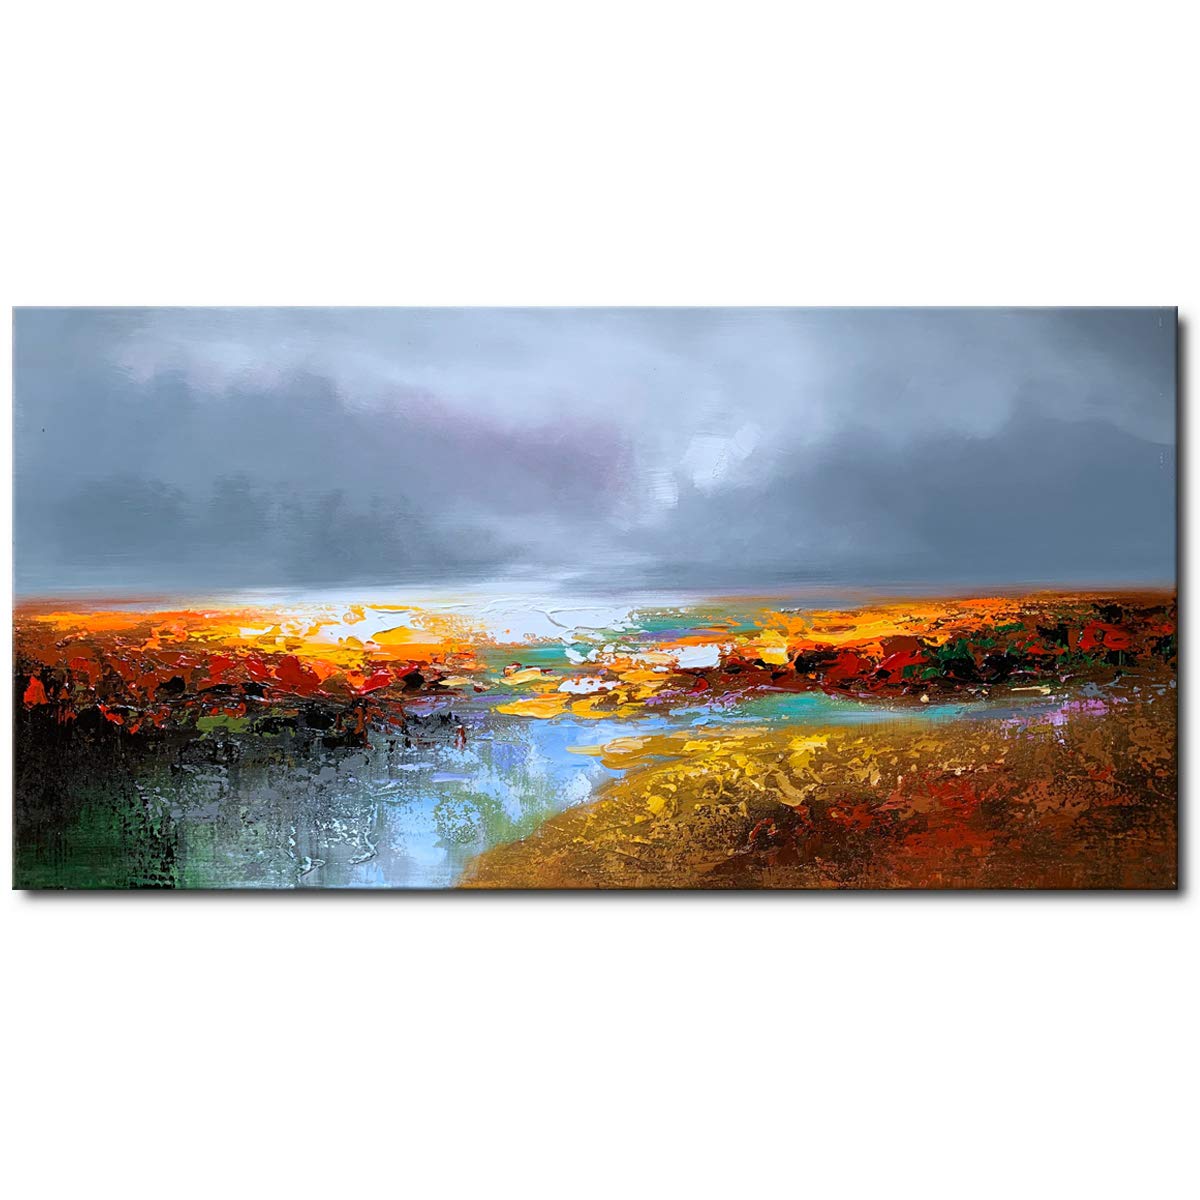 Large Abstract Landscape Wall Art Handmade Oil Painting on Canvas Modern Home Decor